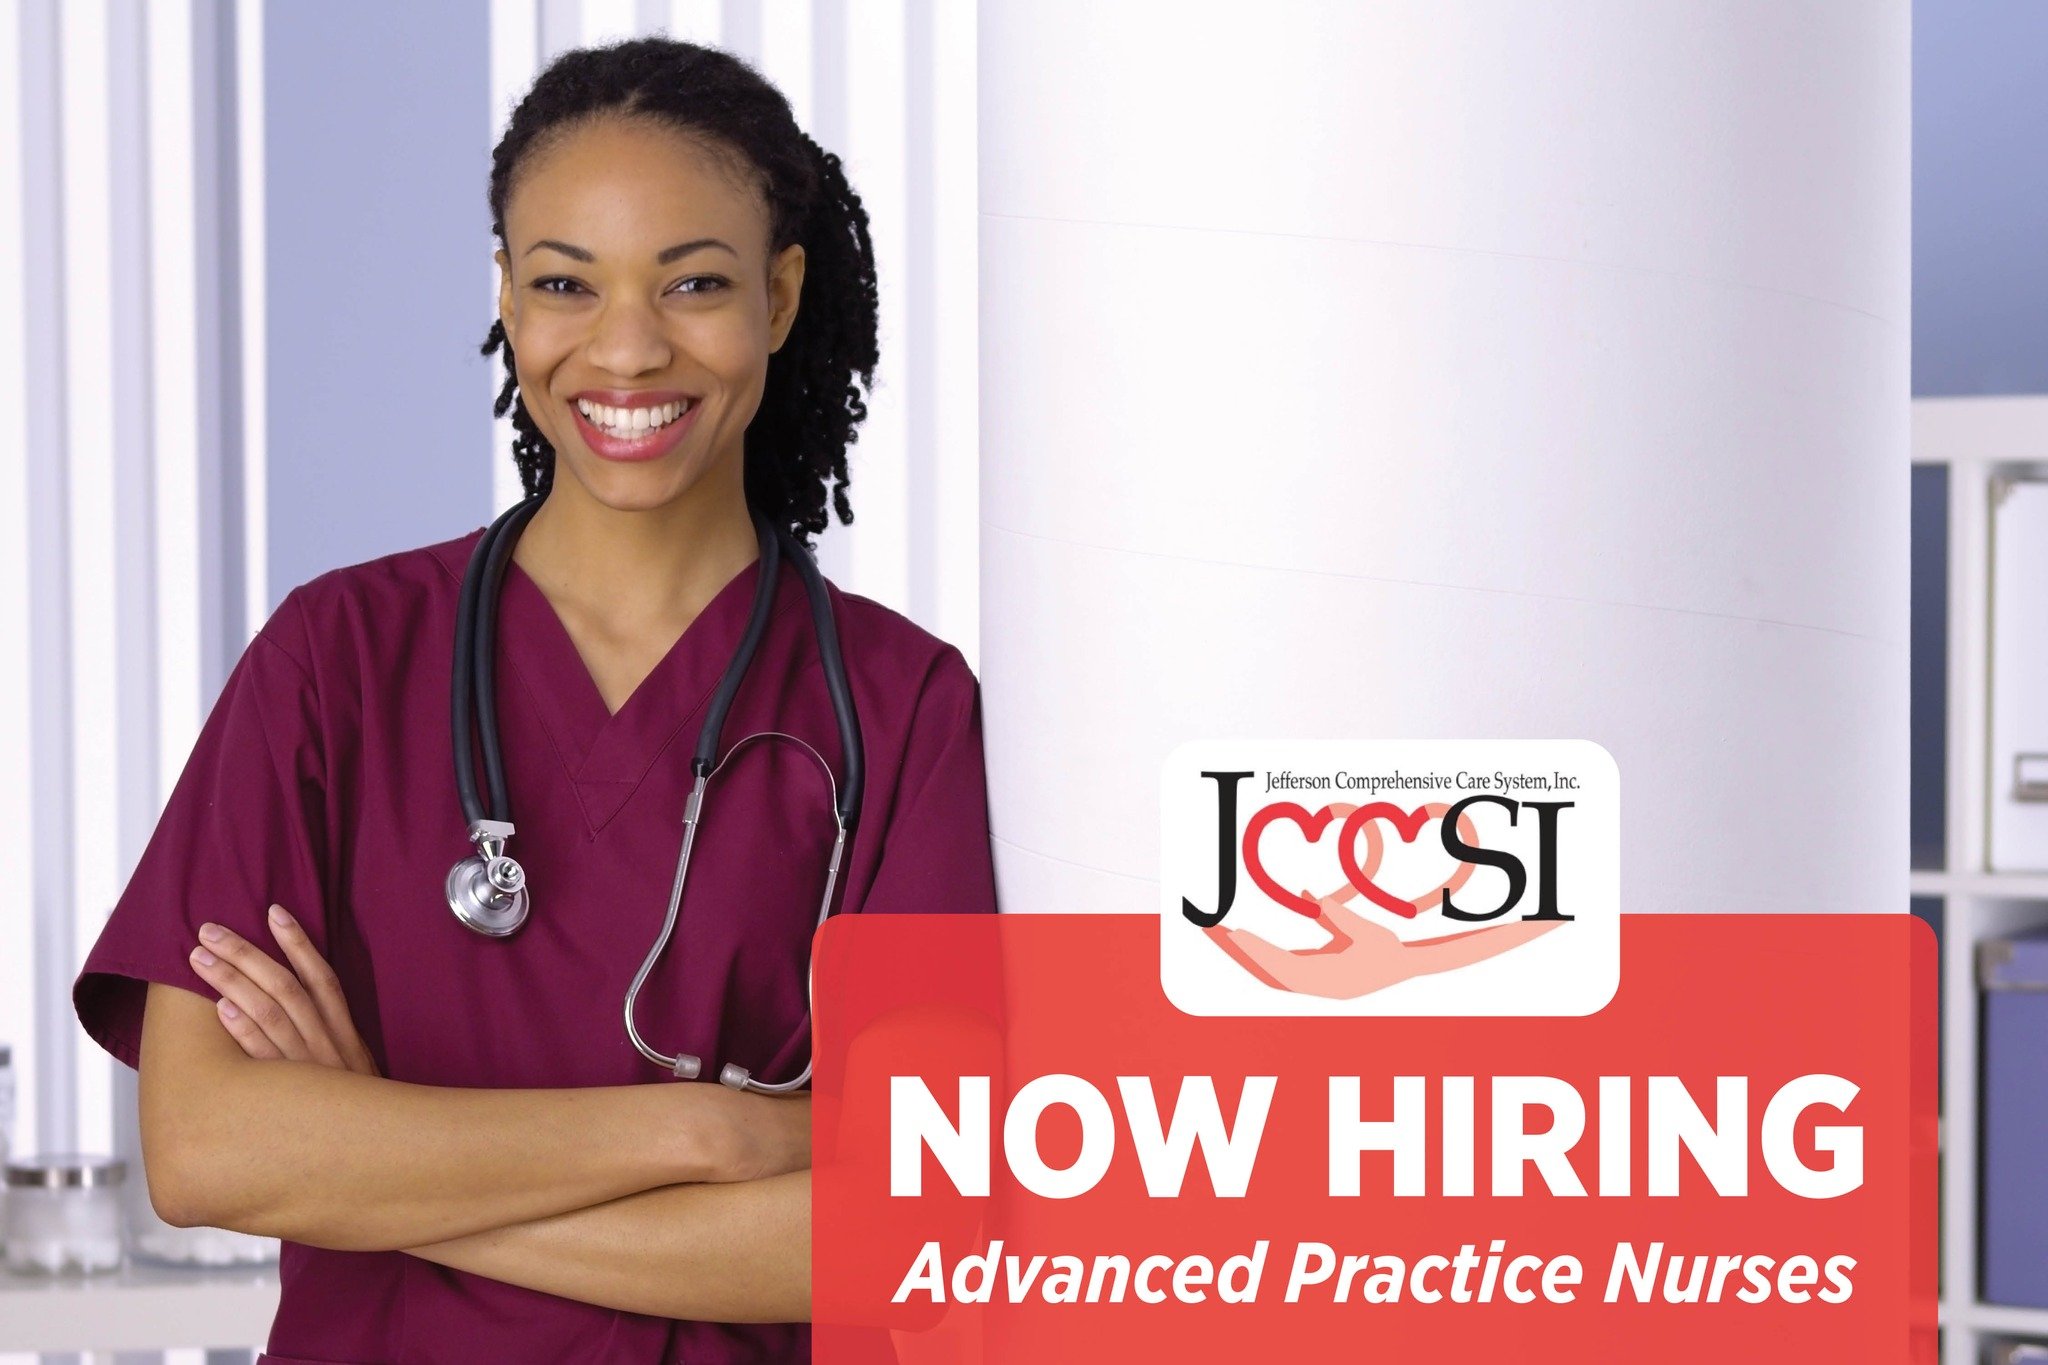 We're looking for an APRN to join our team in Little Rock, Redfield and College Station. This full-time position provides primary health care services to children and adults. Learn more and apply at https://www.jccsi.org/employment.